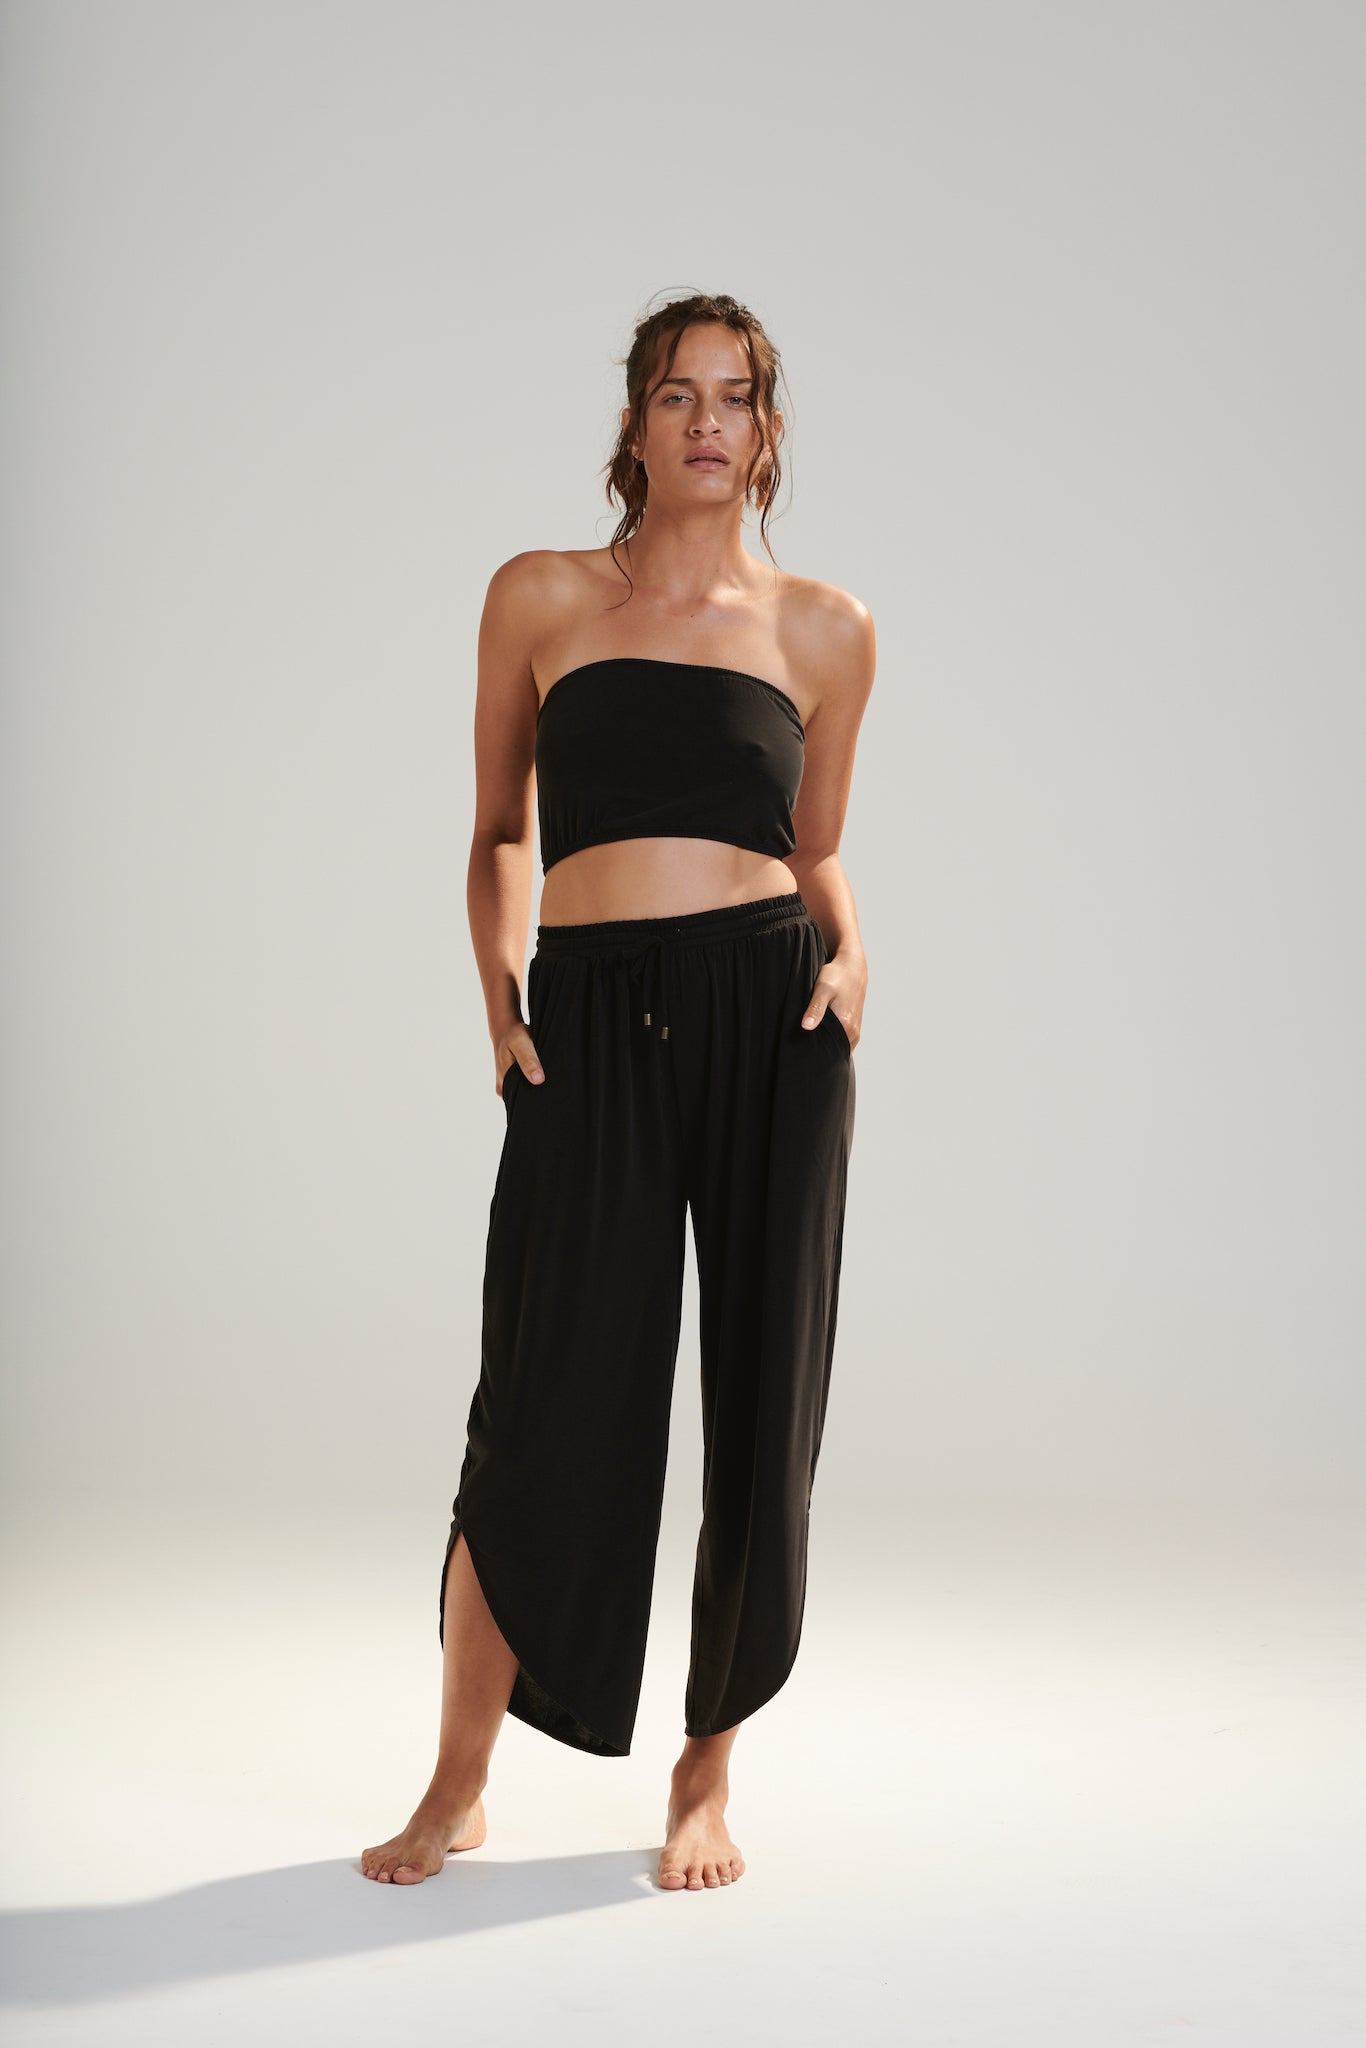 BELU PANT DARK WASHED BLACK LUXURY LOUNGEWEAR RELAXED KNIT PANTS WITH ELASTIC WAIST AND PETAL HEM FRONT VIEW